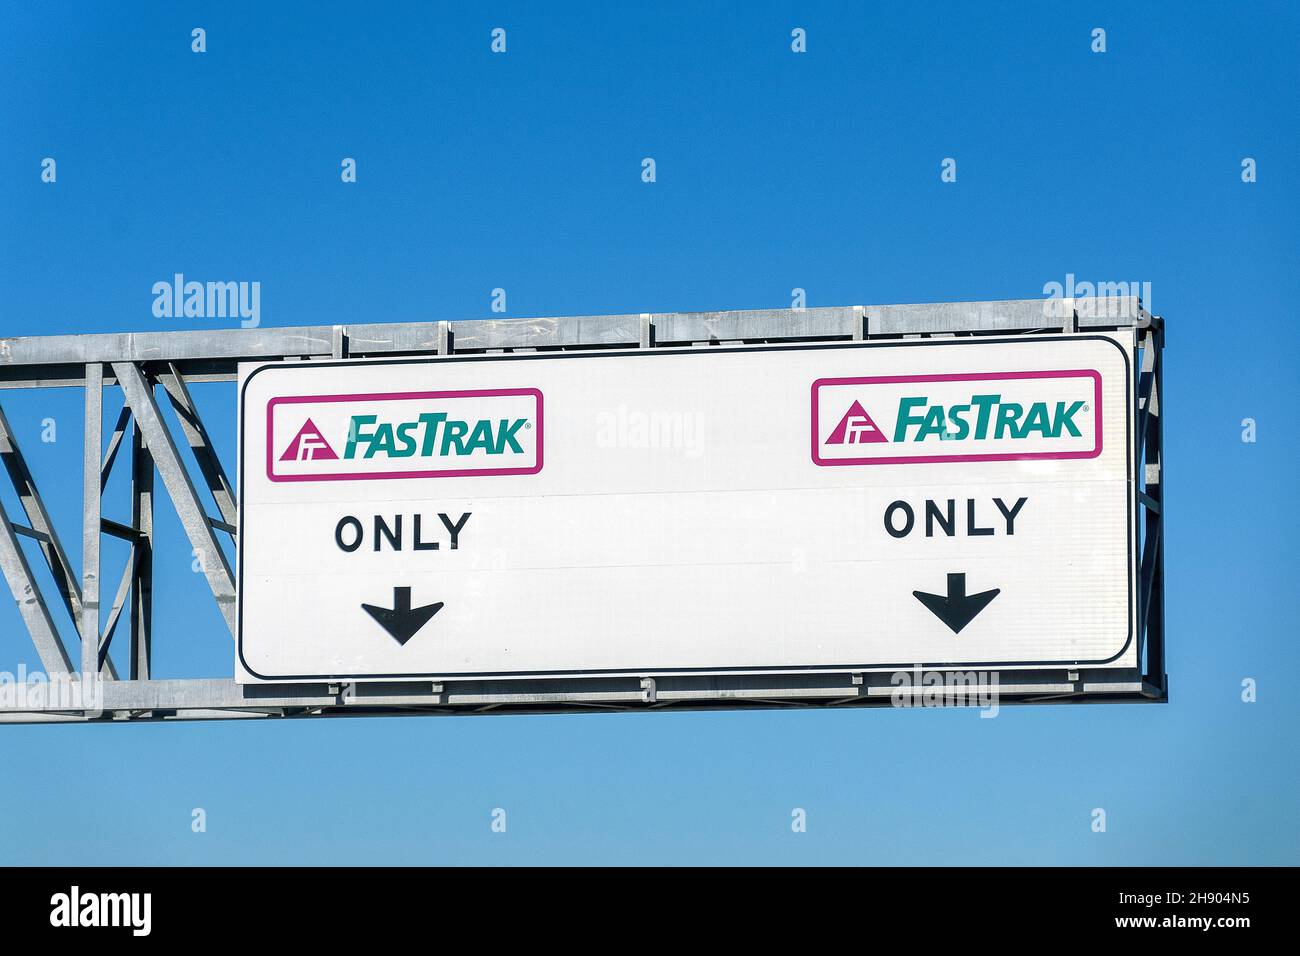 FasTrak Only express lane road sign. FasTrak is an electronic toll collection ETC system on toll roads, bridges, and high-occupancy toll lanes in Cali Stock Photo